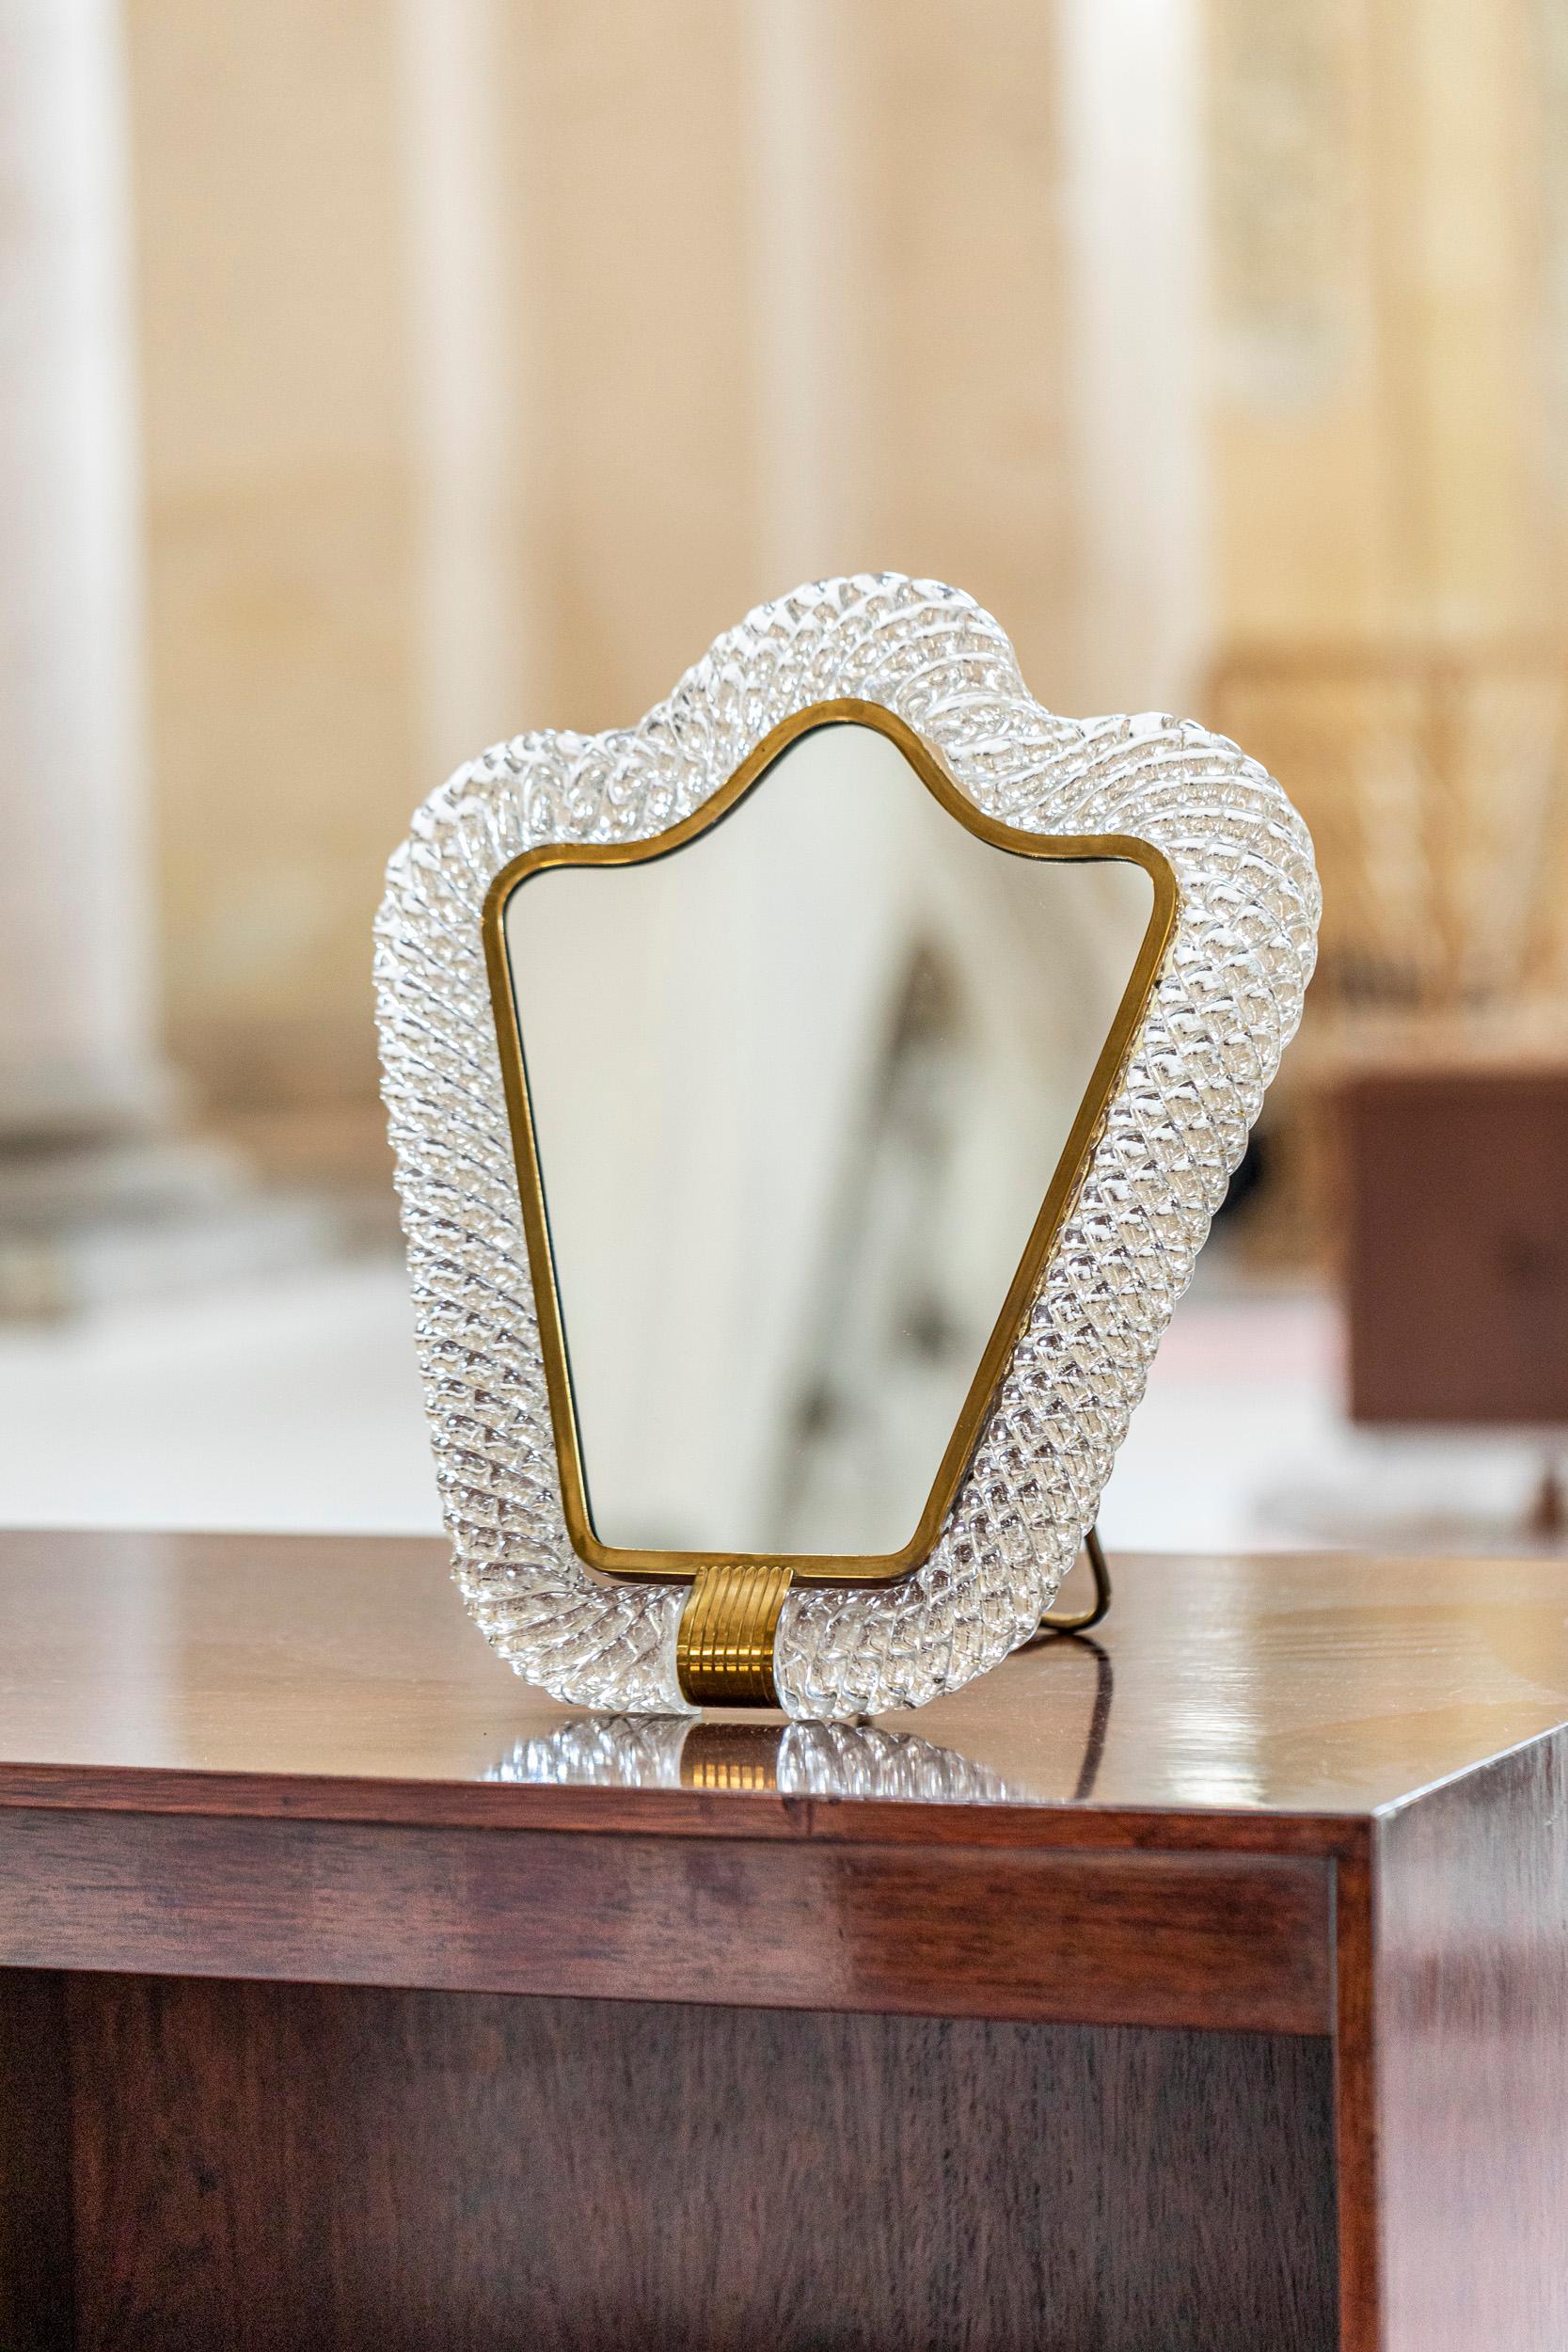 Barovier & Toso table mirror with frame in Murano Glass Torchon.
Mirror with a gorgeous frame entirely in Murano Glass, worked in the way of 